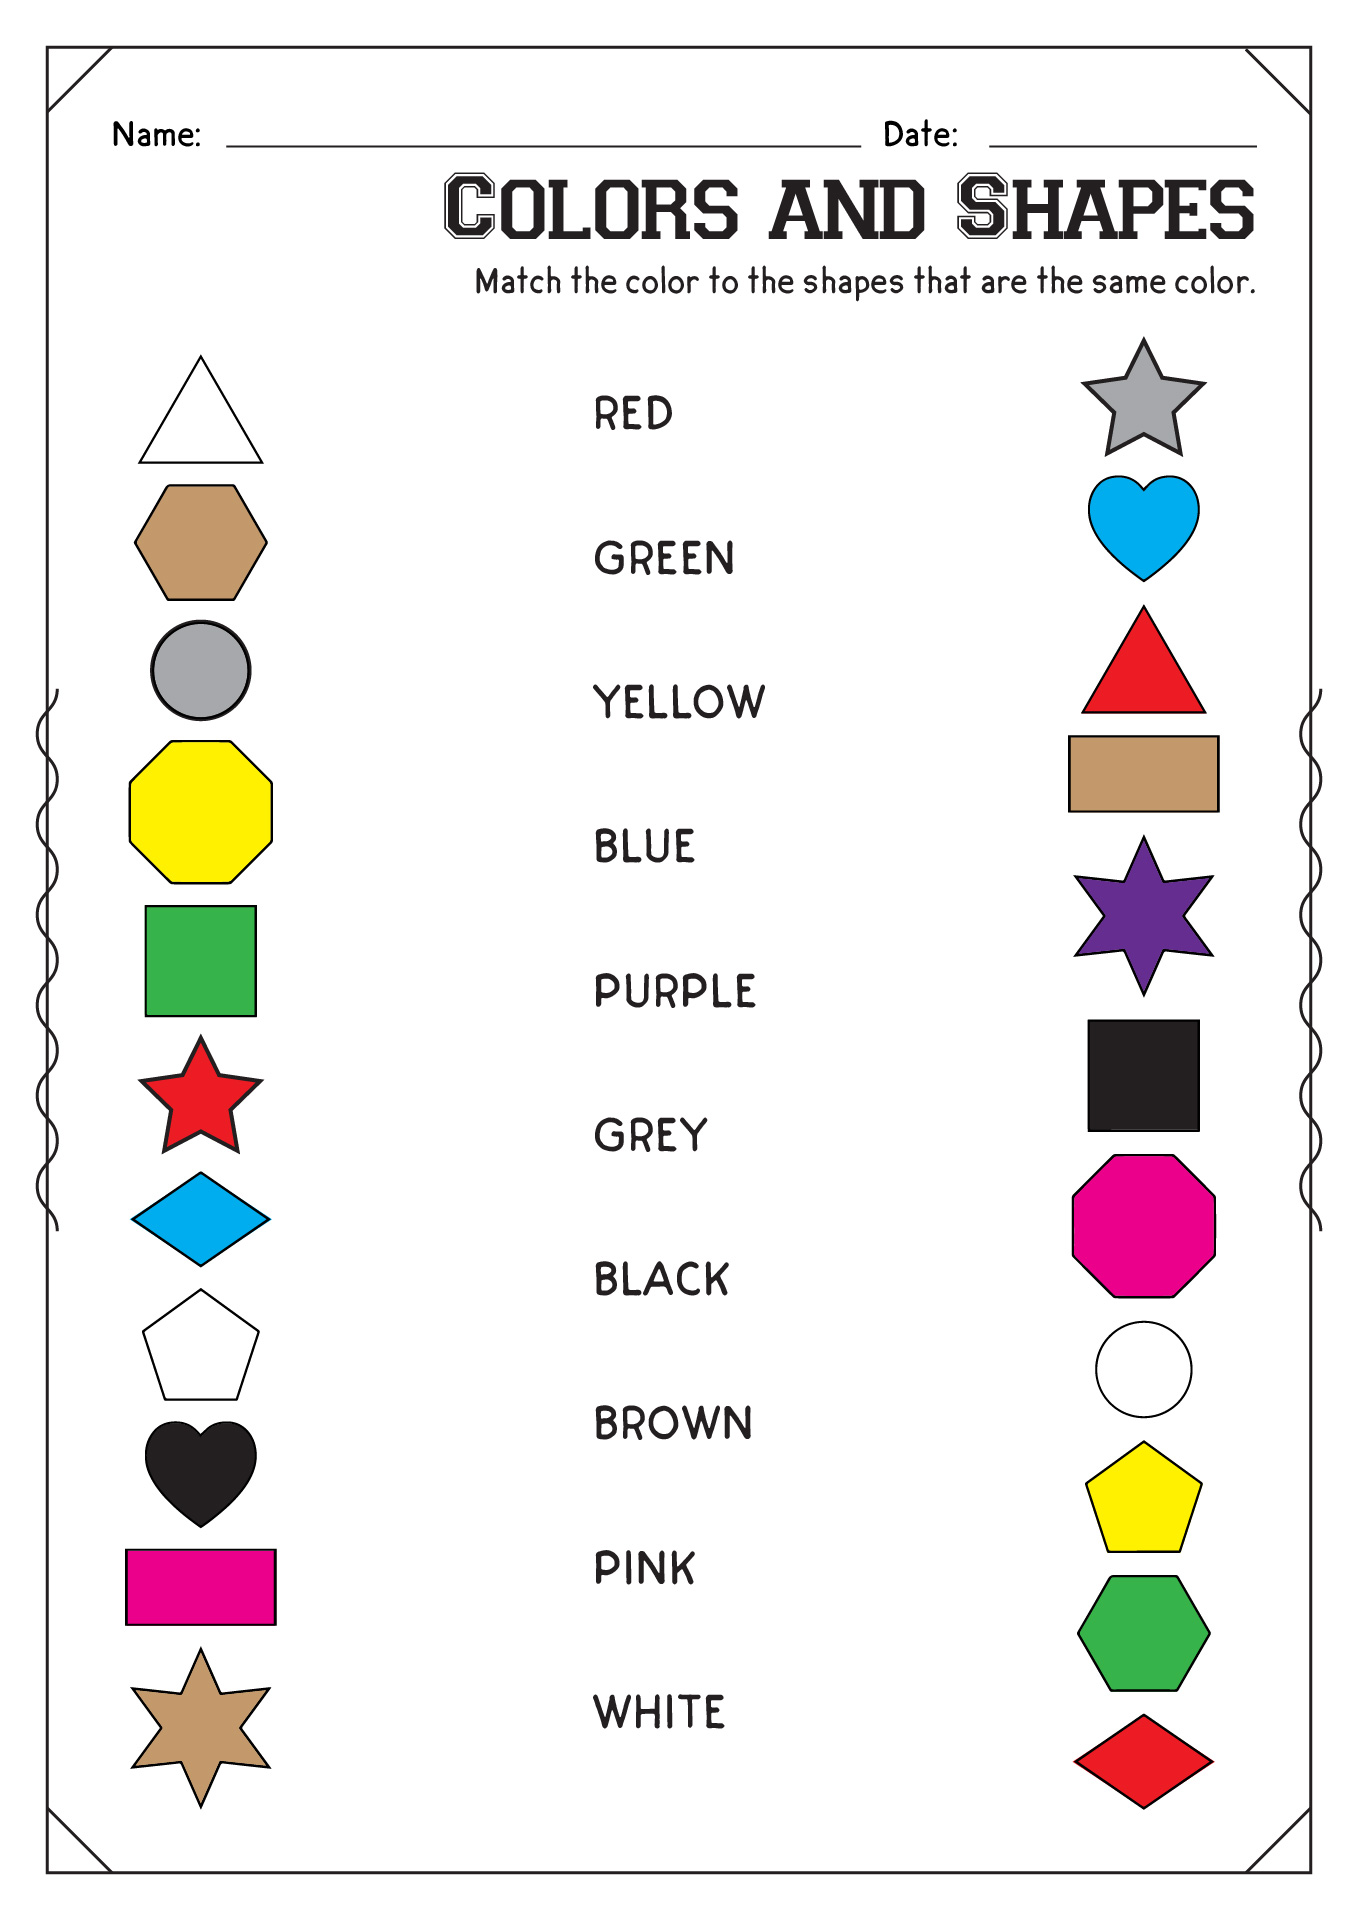 Colors and Shapes Worksheet